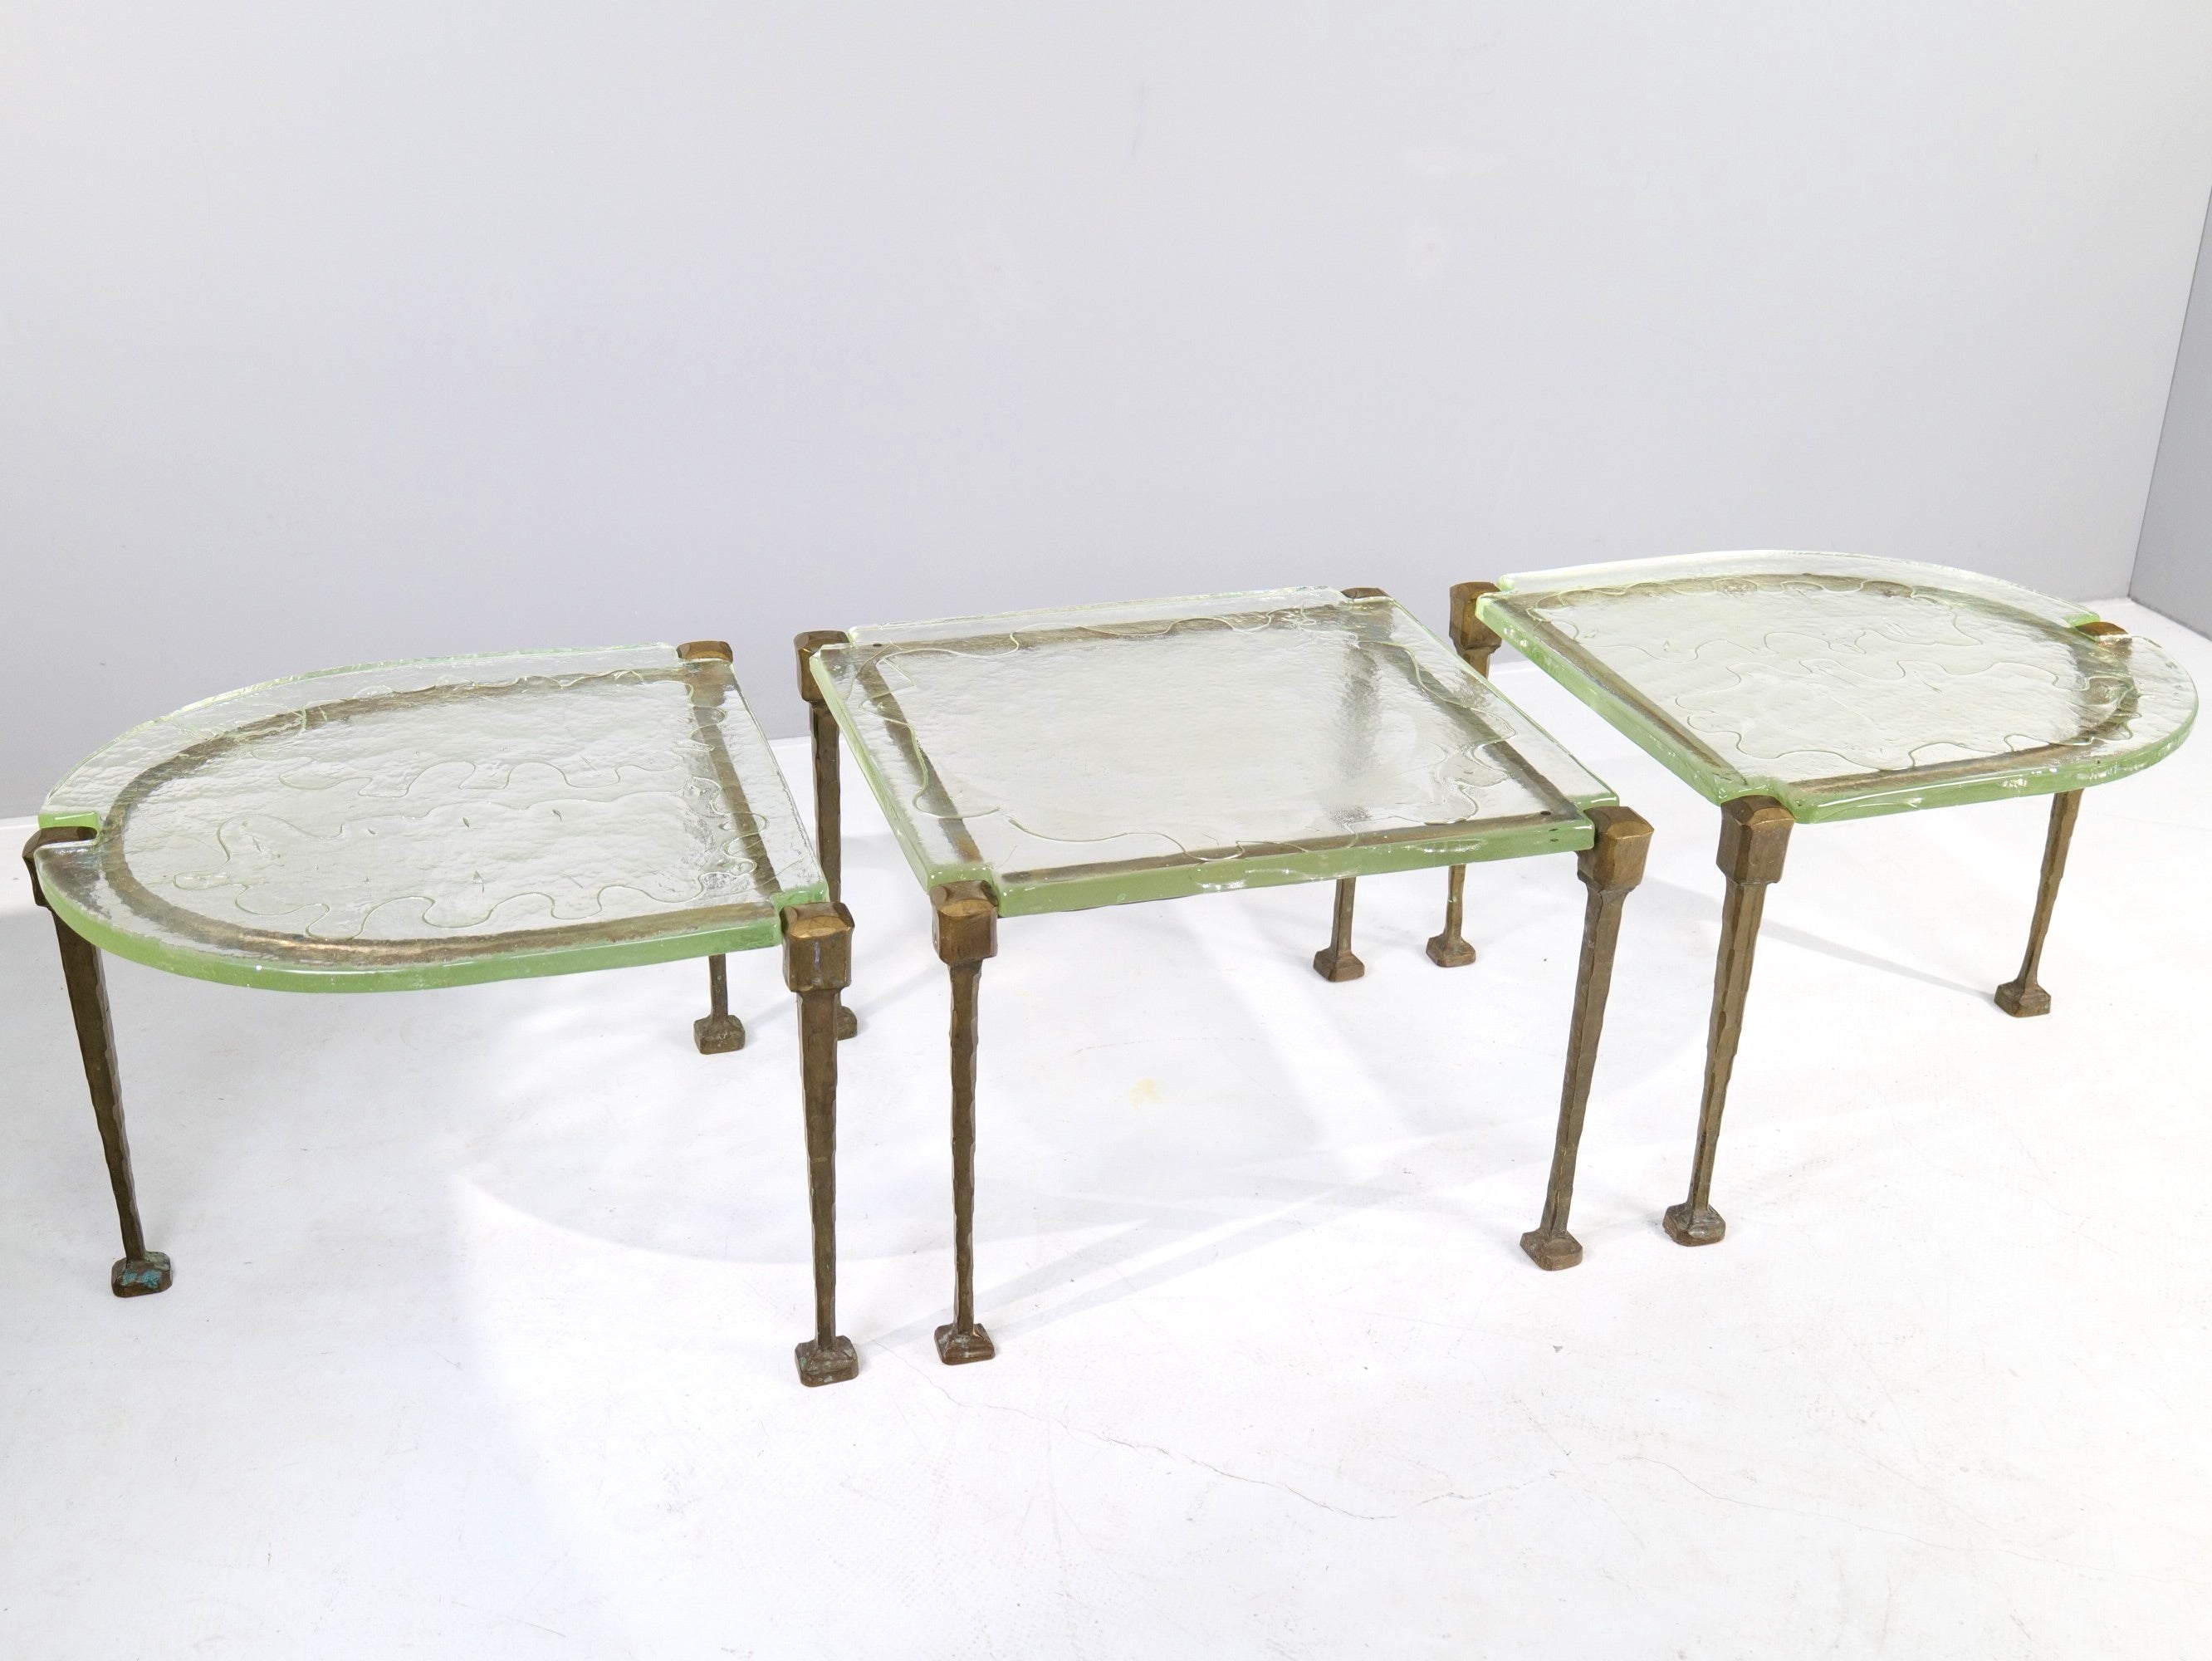 vintage set forged bronzed tables attributed Lothar Klute 1980's Germany